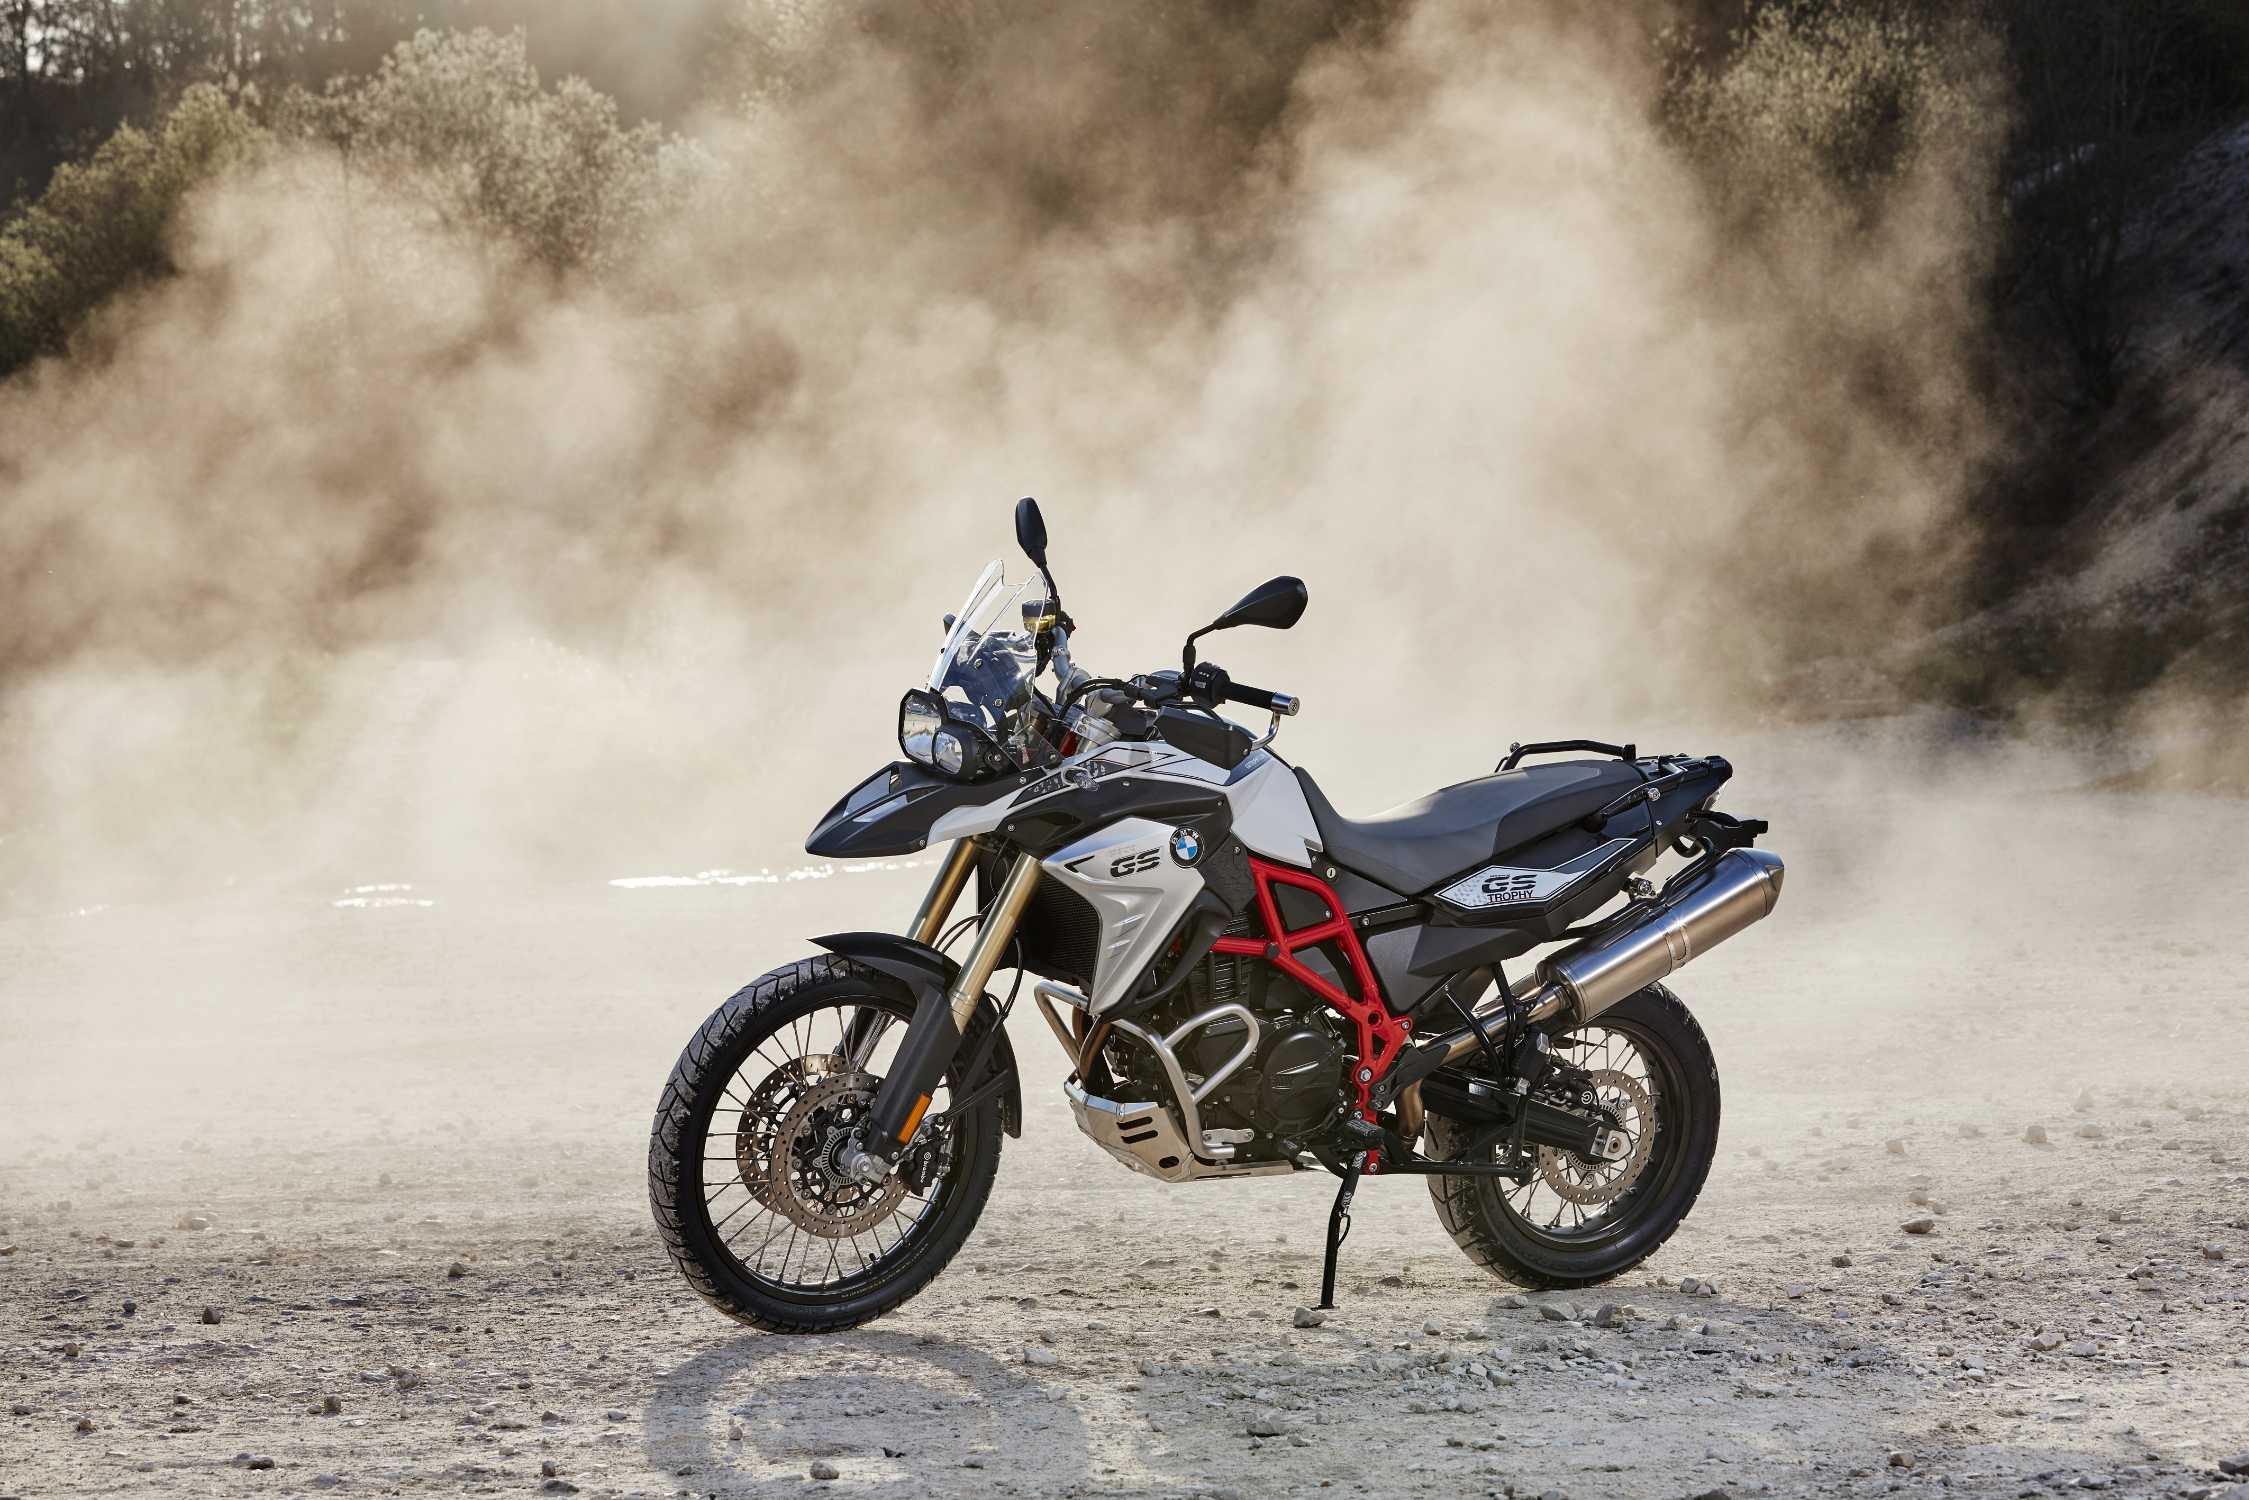 Sucediendo Baya Humilde The new BMW F 700 GS, F 800 GS and F 800 GS Adventure.